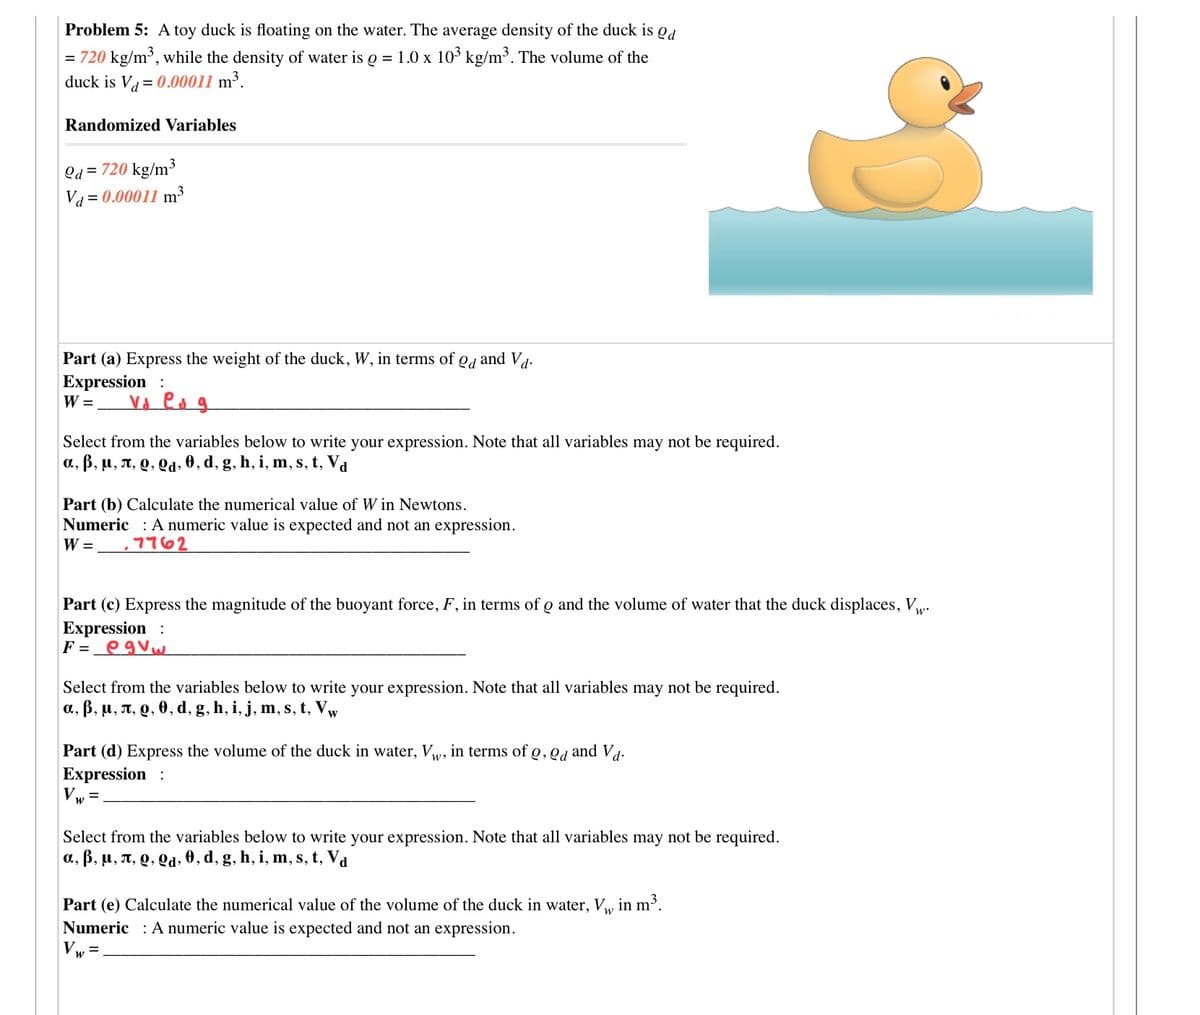 Problem 5: A toy duck is floating on the water. The average density of the duck is od
= 720 kg/m³, while the density of water is o = 1.0 x 10° kg/m³. The volume of the
duck is V = 0.00011 m³.
Randomized Variables
Qd = 720 kg/m³
Va = 0.00011 m³
Part (a) Express the weight of the duck, W, in terms of,
Od
and Vd-
Expression :
W =
Vd es g
Select from the variables below to write your expression. Note that all variables may not be required.
a, B, u, T, Q, Qd, 0, d, g, h, i, m, s, t, Va
Part (b) Calculate the numerical value of W in Newtons.
Numeric : A numeric value is expected and not an expression.
W =
7762
Part (c) Express the magnitude of the buoyant force, F, in terms of o and the volume of water that the duck displaces, w.
Expression :
F =_egVw
Select from the variables below to write your expression. Note that all variables may not be required.
a, B, u, n, Q, 0, d, g, h, i, j, m, s, t, Vw
Part (d) Express the volume of the duck in water, Vw, in terms of Q, Qd and Va-
Expression :
Vw=
Select from the variables below to write your expression. Note that all variables may not be required.
a, B, u, A, Q, Qd, 0, d, g, h, i, m, s, t, Va
Part (e) Calculate the numerical value of the volume of the duck in water, Vw in m³.
Numeric : A numeric value is expected and not an expression.
Vw =
